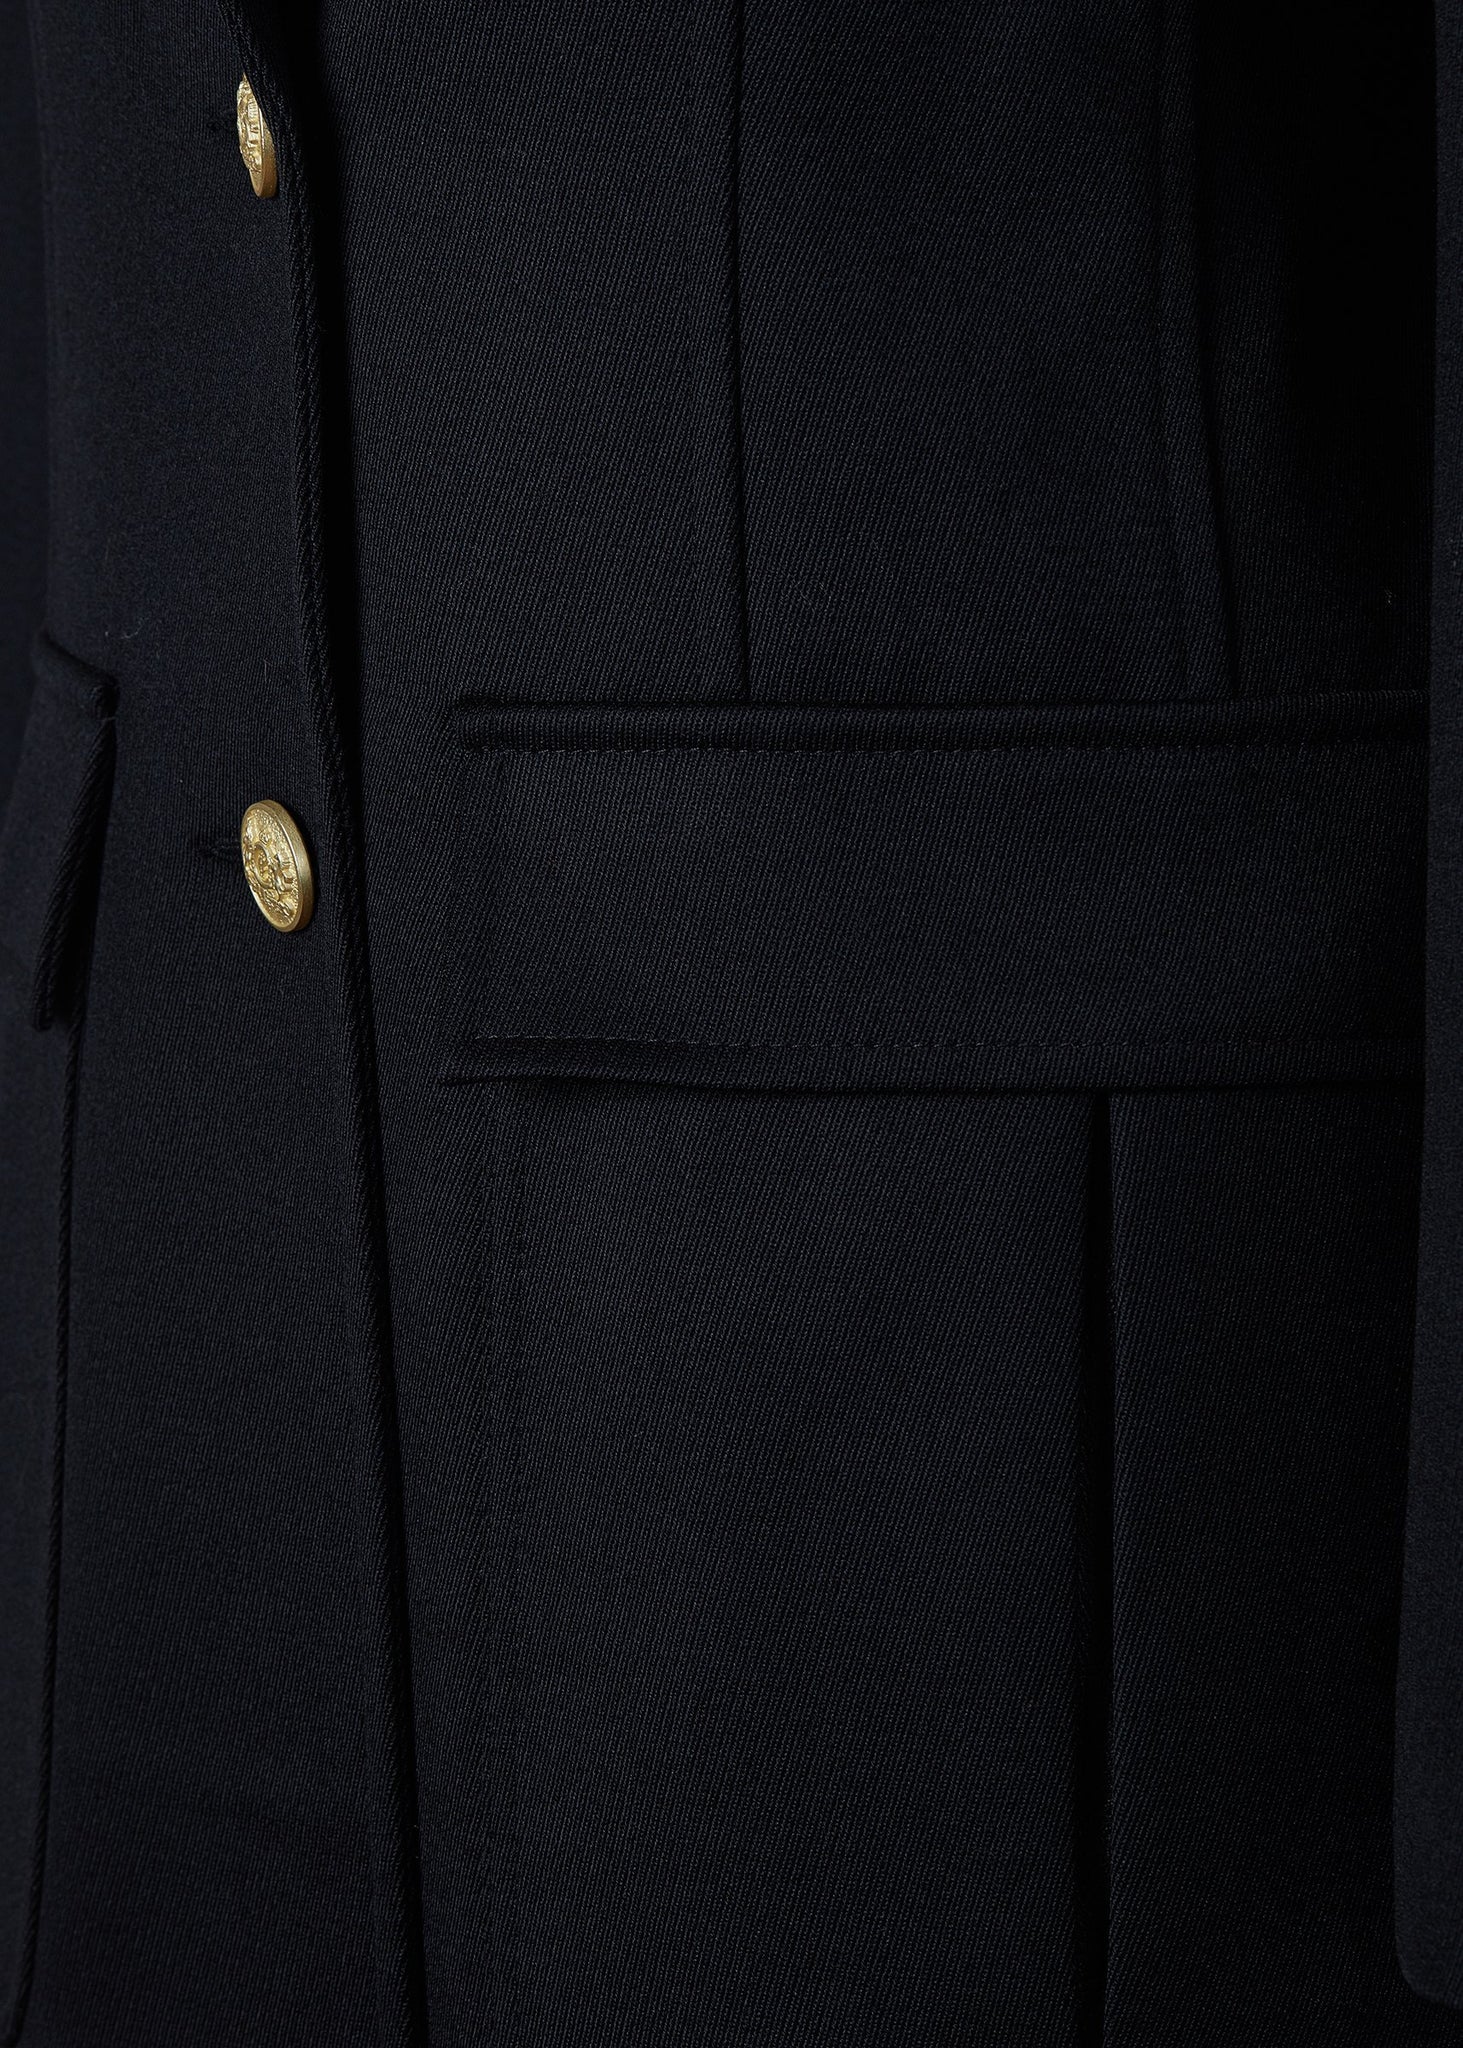 pocket detail and gold front buttons on relaxed fit single breasted blazer breasted blazer in black with patch pockets and tonal black leather elbow patches and collar